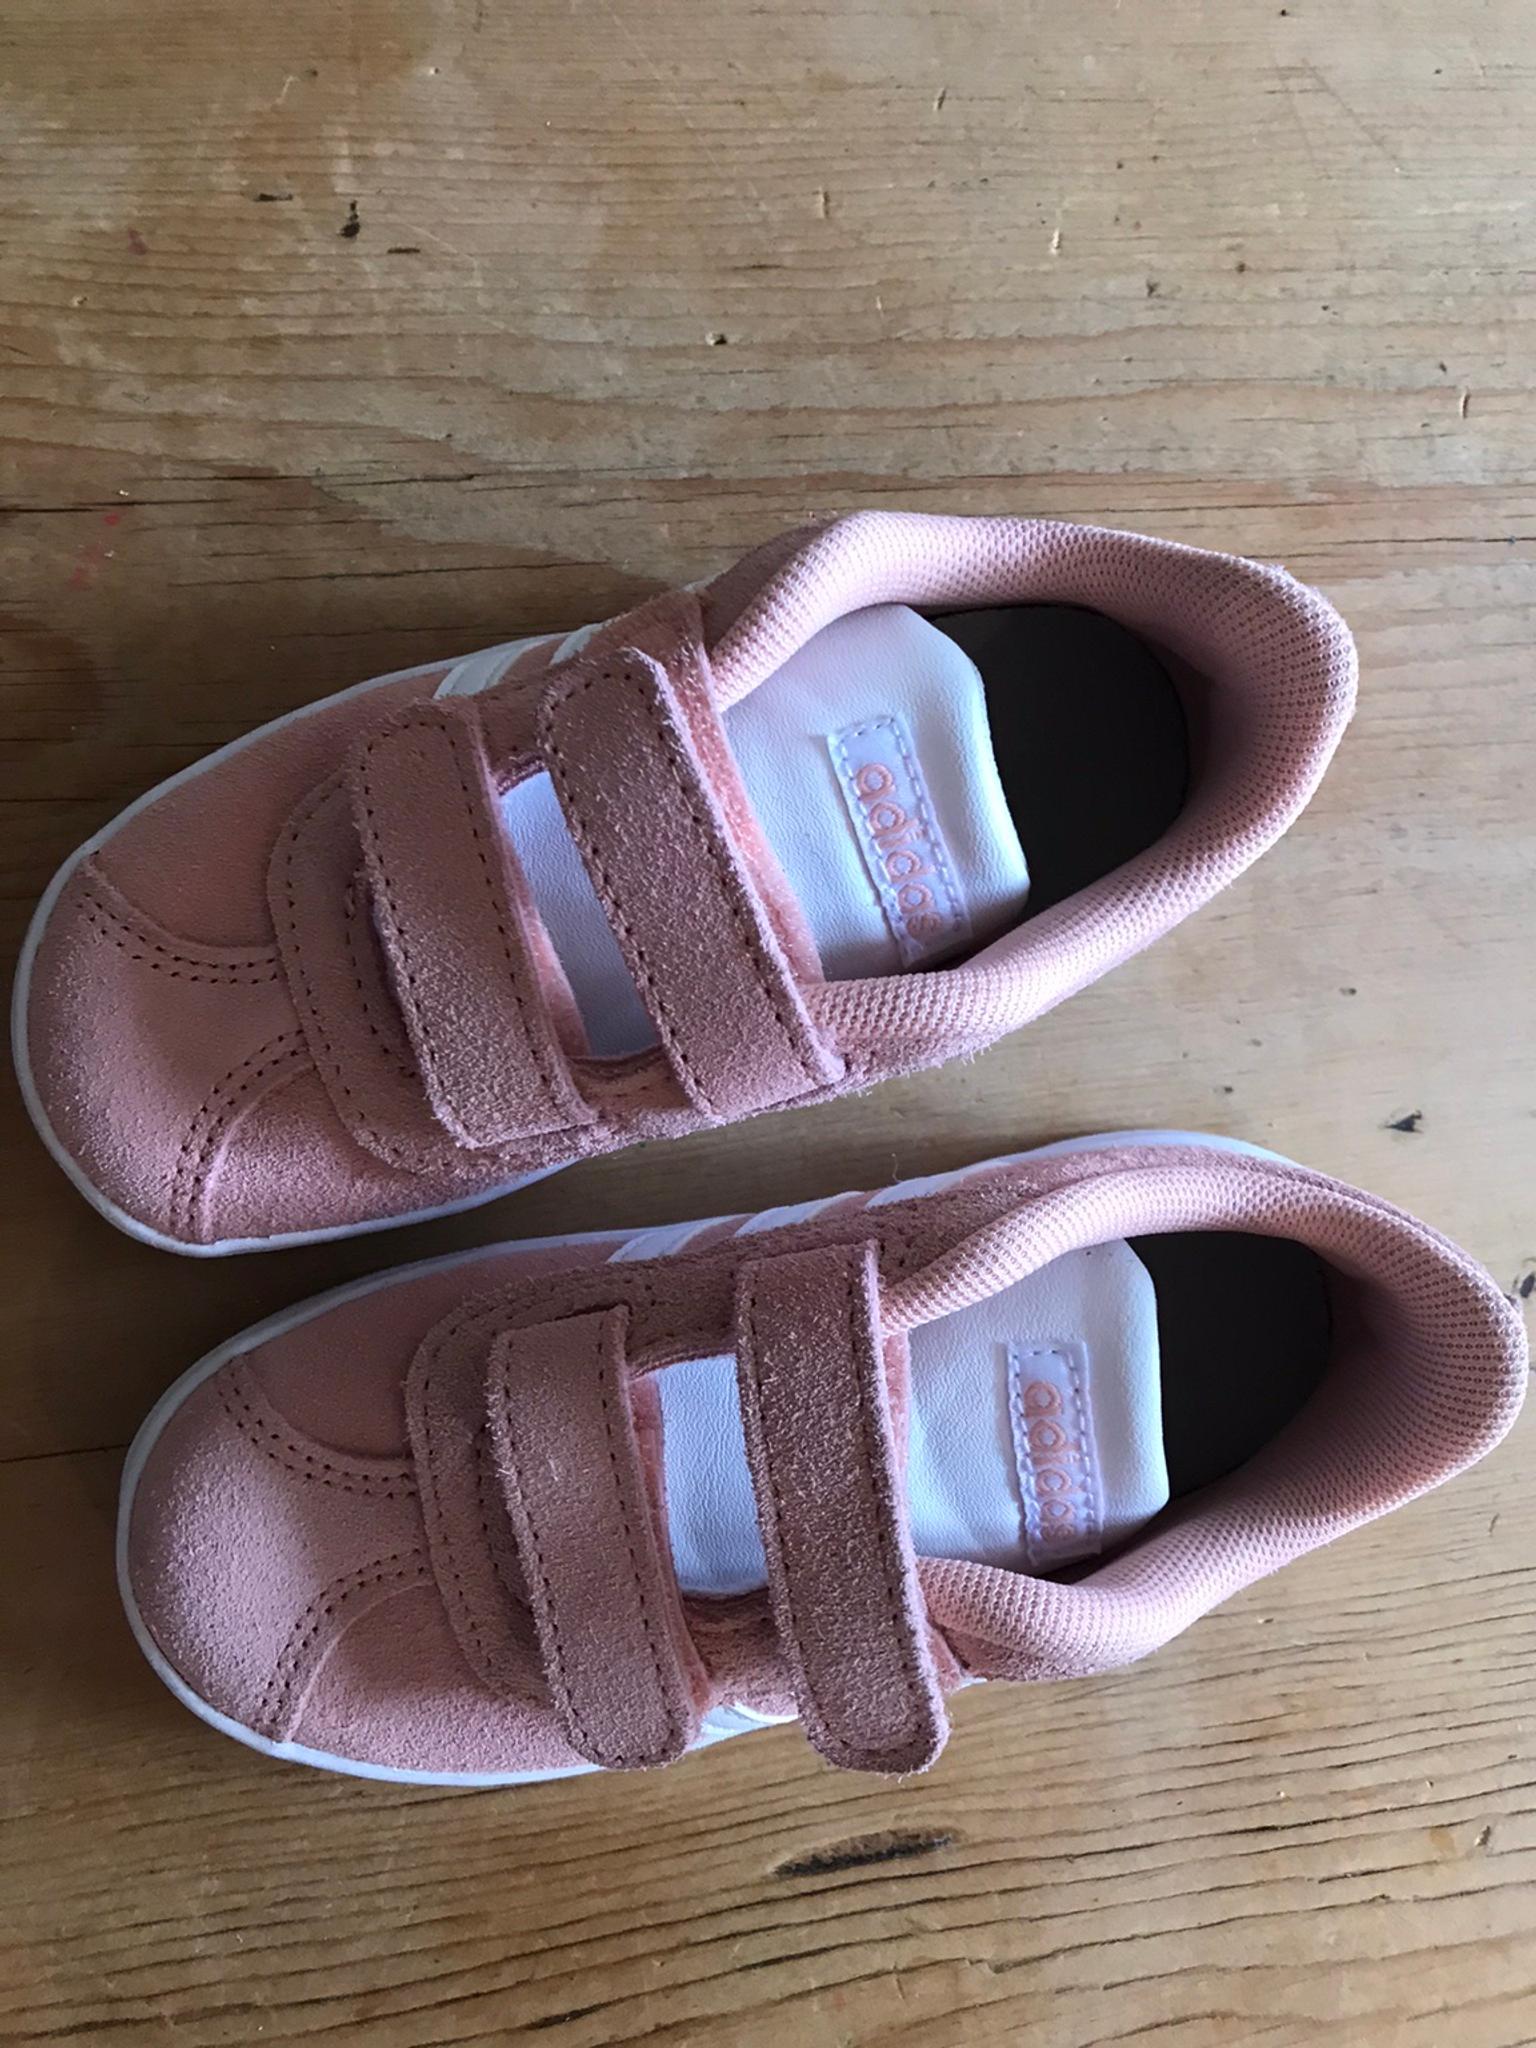 toddler adidas gazelle trainers